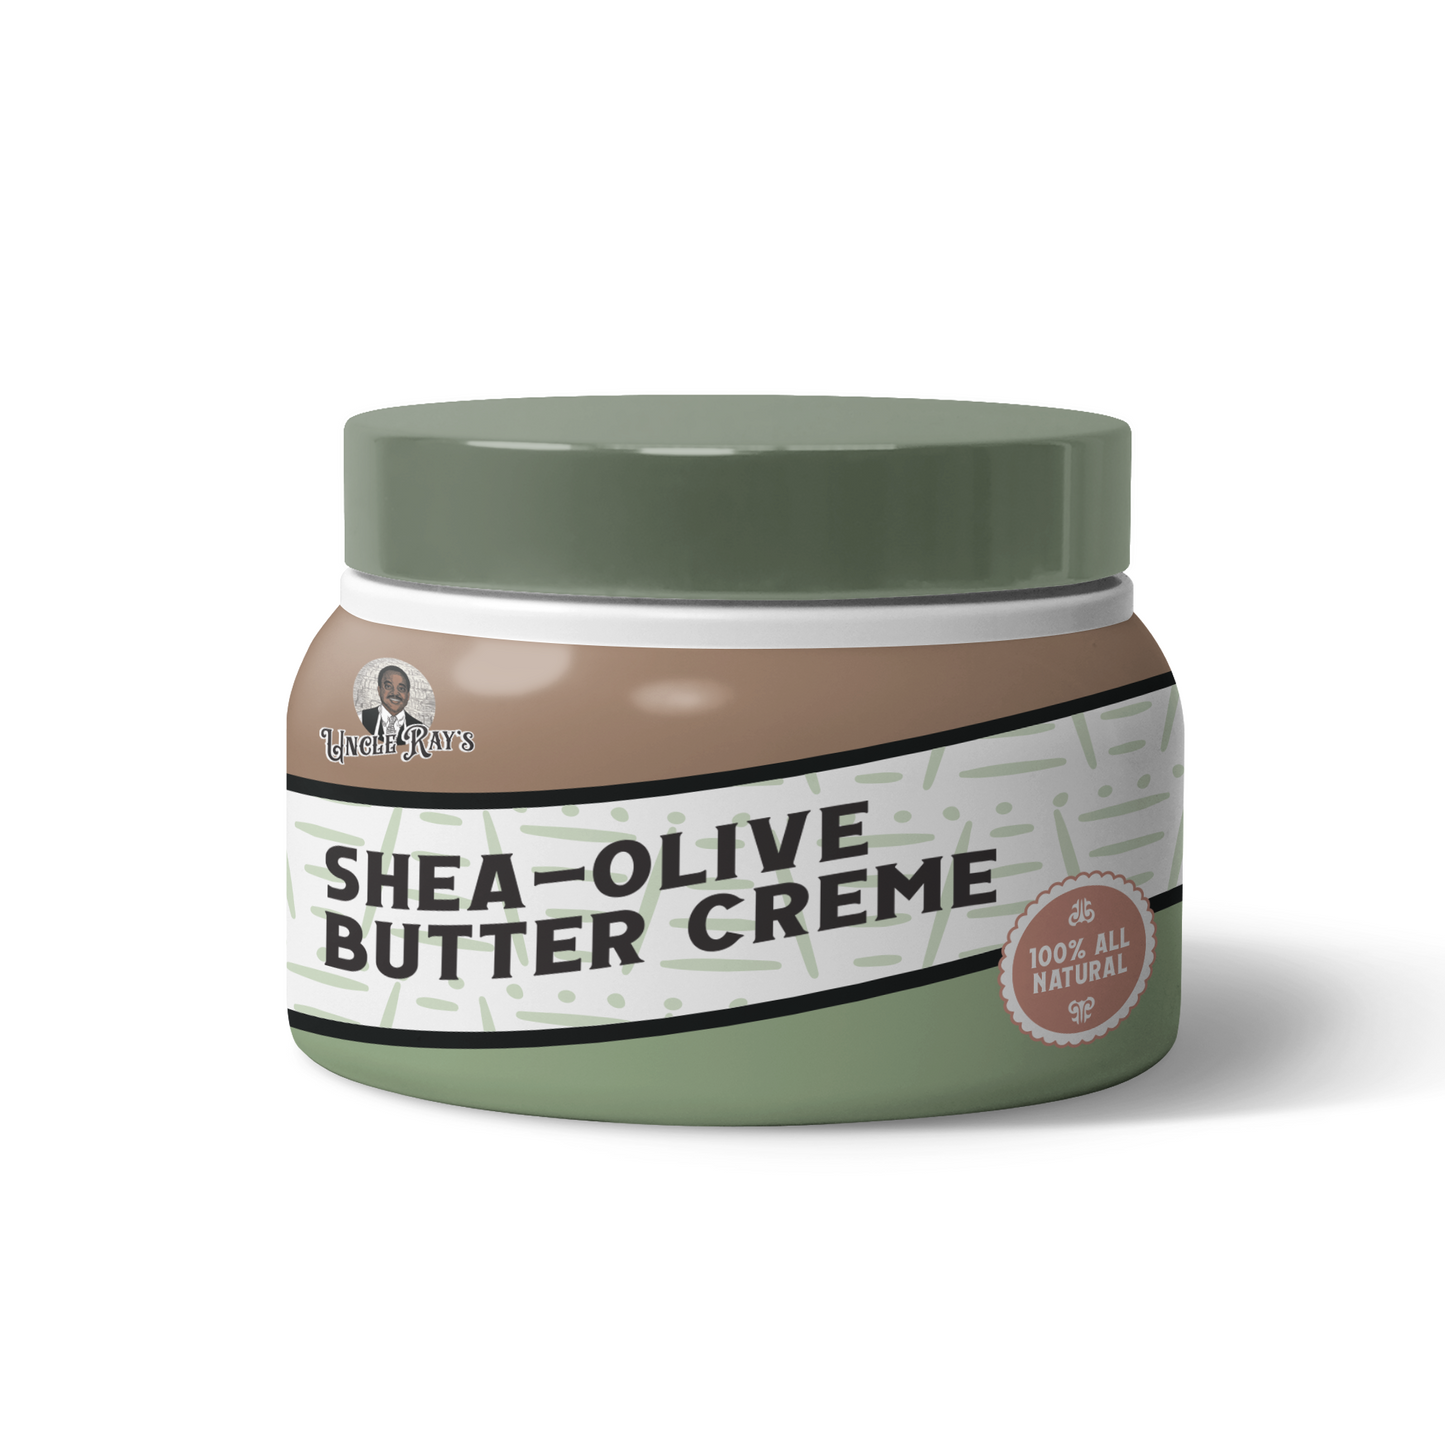 Shea-Olive Butter Creme